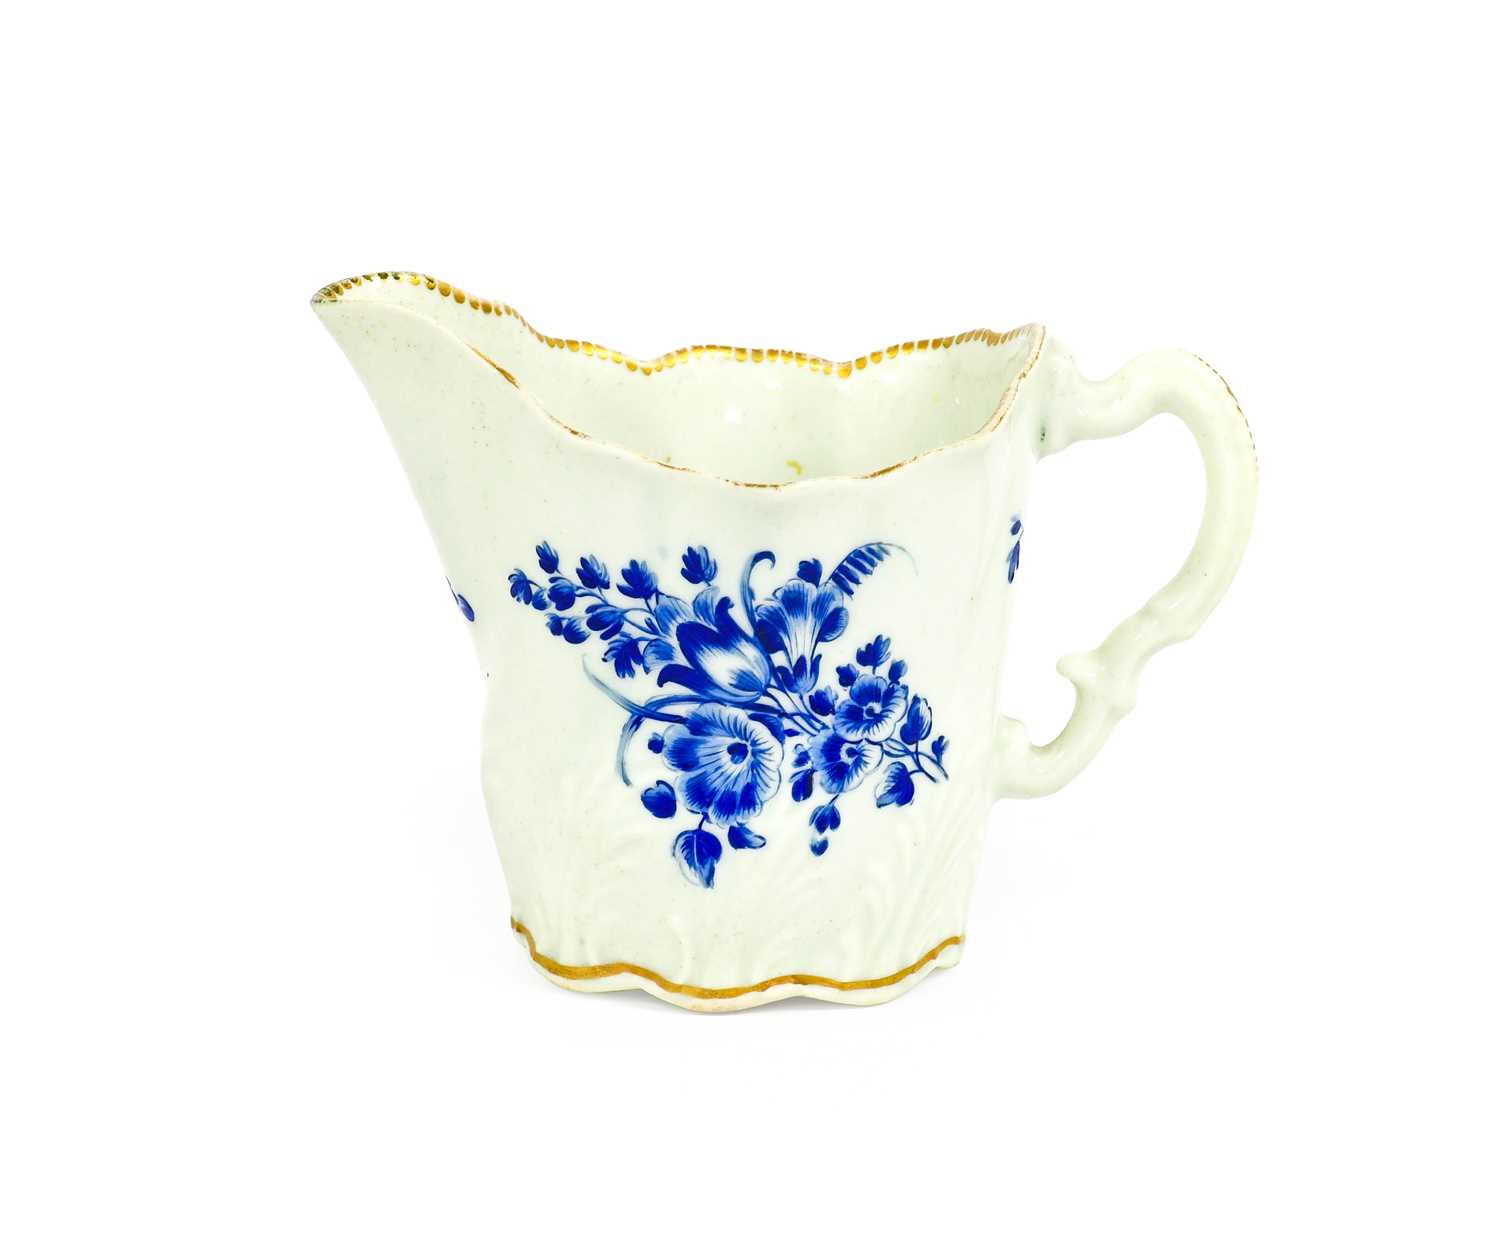 A Worcester Porcelain Cream Boat, circa 1770, of high Chelsea ewer form, with scrolling handle and